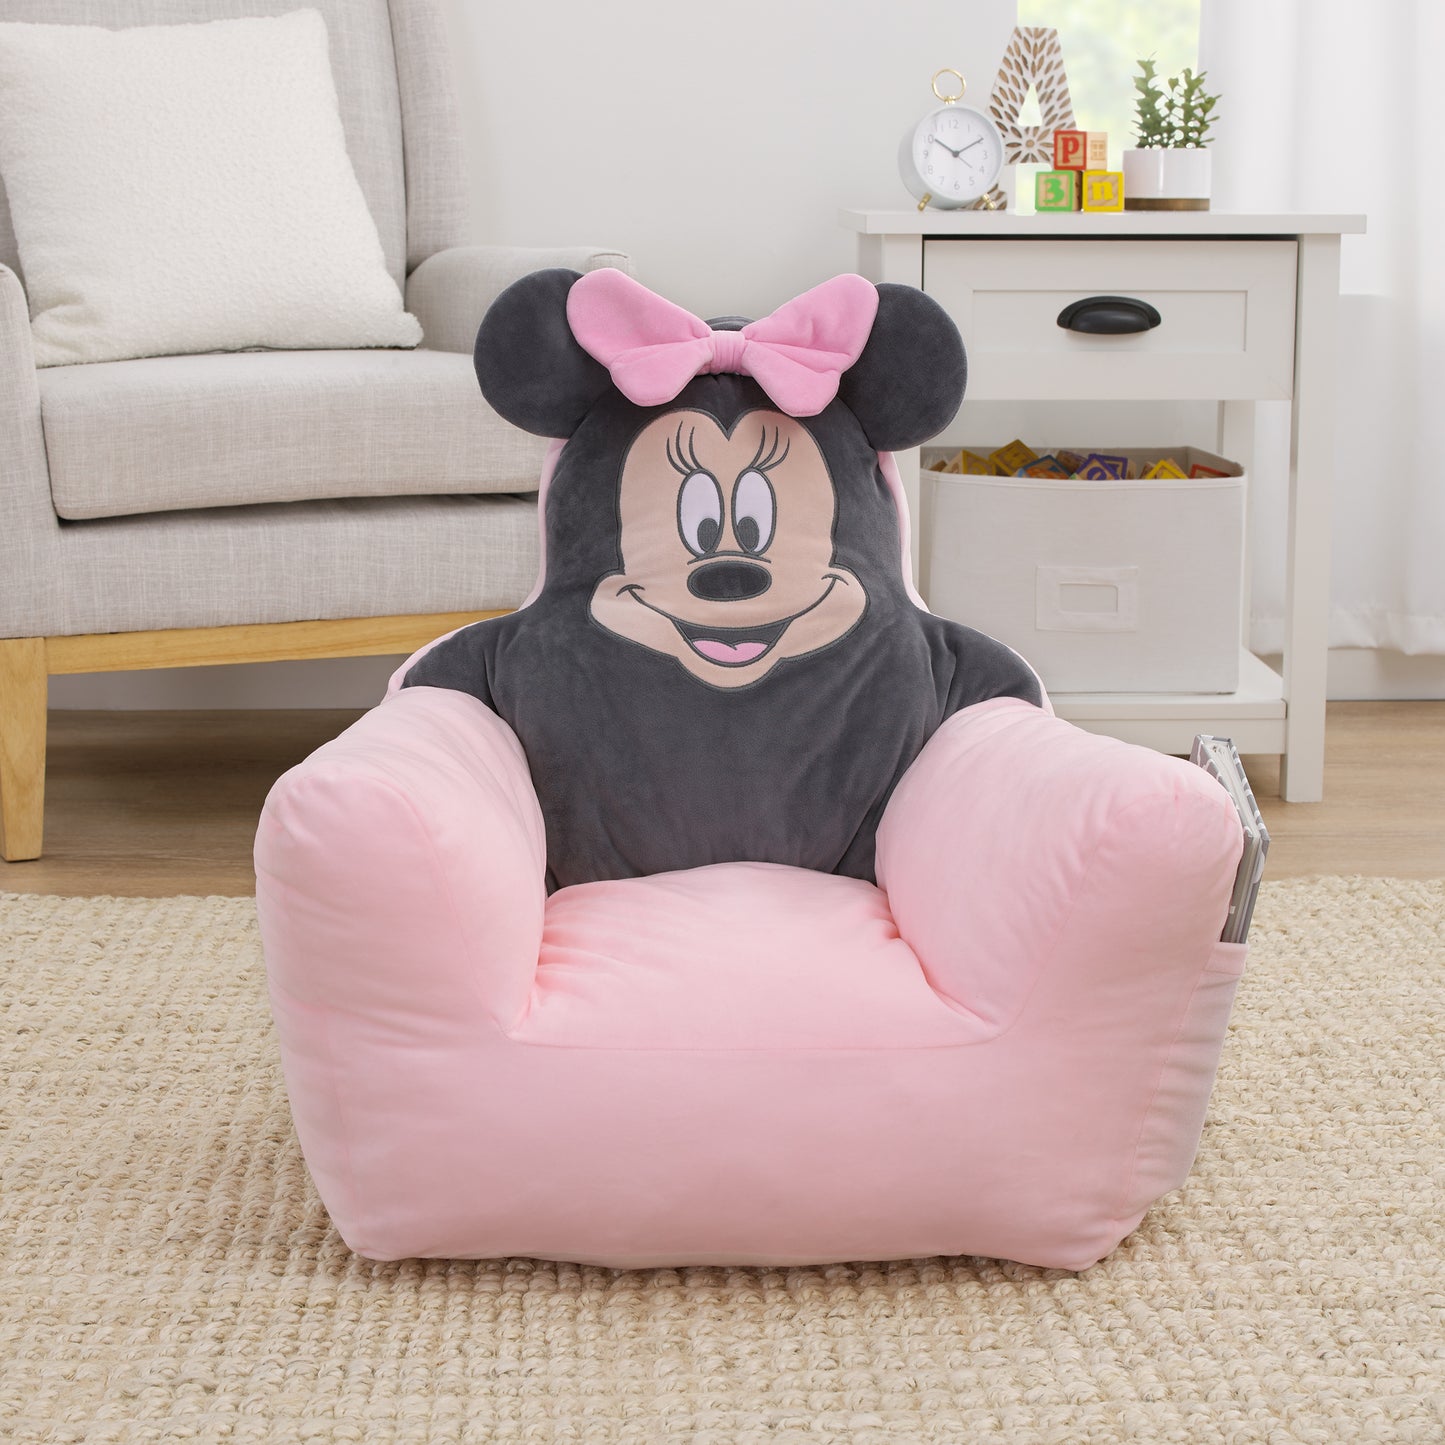 Disney Minnie Mouse Shaped Pink, Black, and White Plush Chair